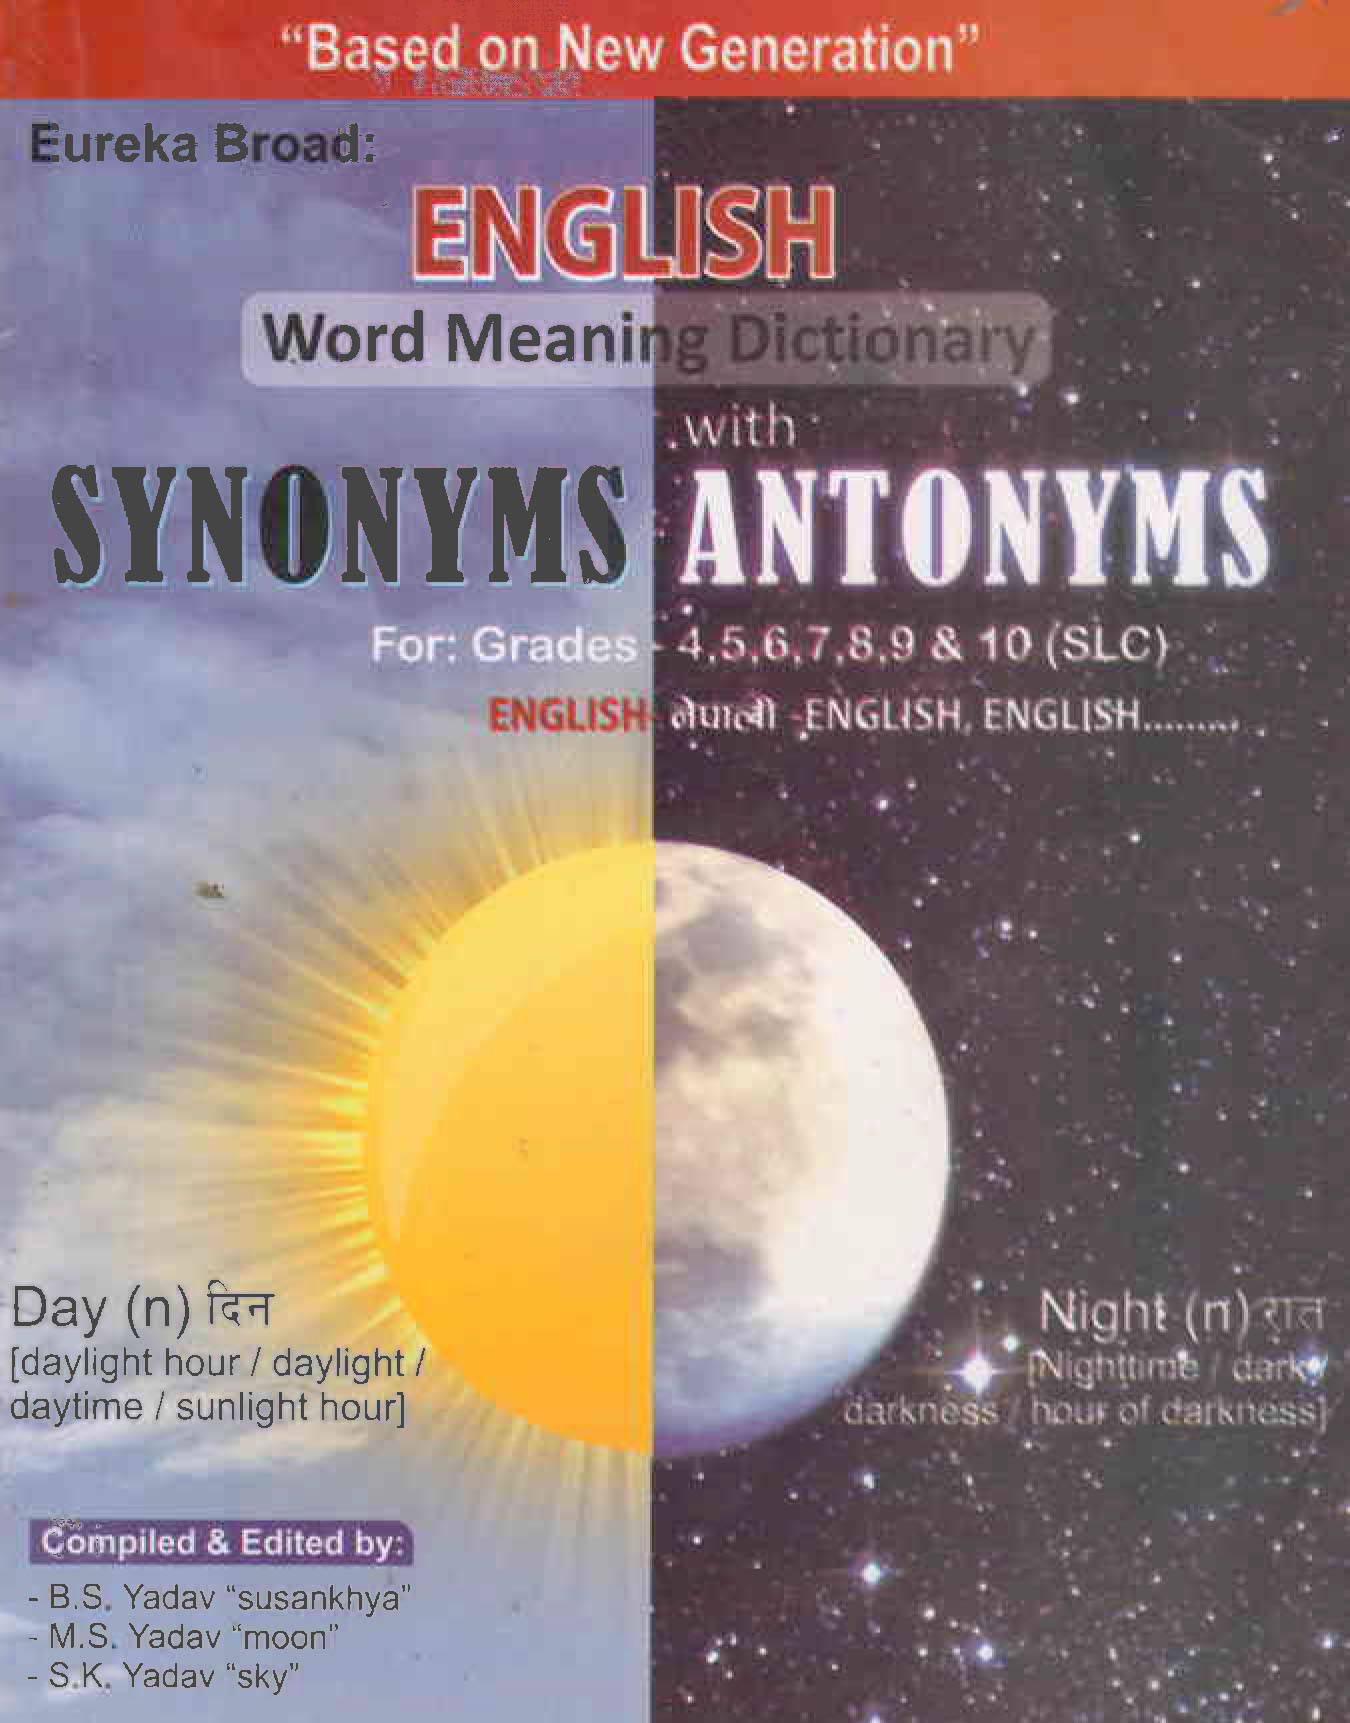 English Word Meaning Dictionary Heritage Publishers Distributors Pvt Ltd